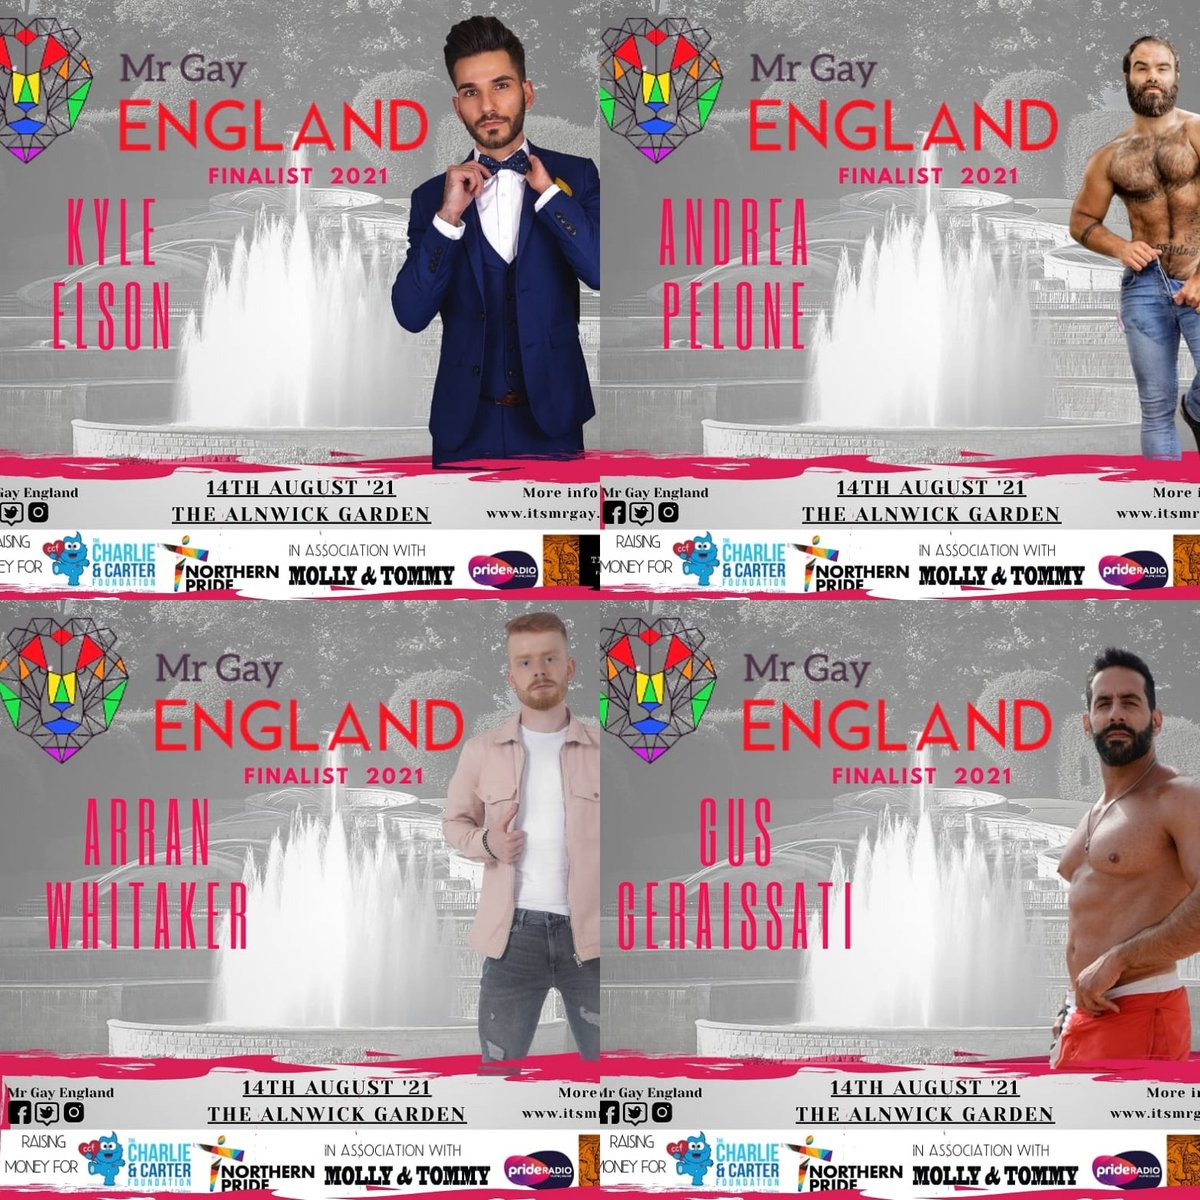 Who will be Mr GAY ENGLAND 2021? 12 Finalists stand before you. They have been raising money for two fabulous charities @charlie1carter & @northernprideuk Health Zones. Show them your support. #BeKind #nohate #mrgayengland